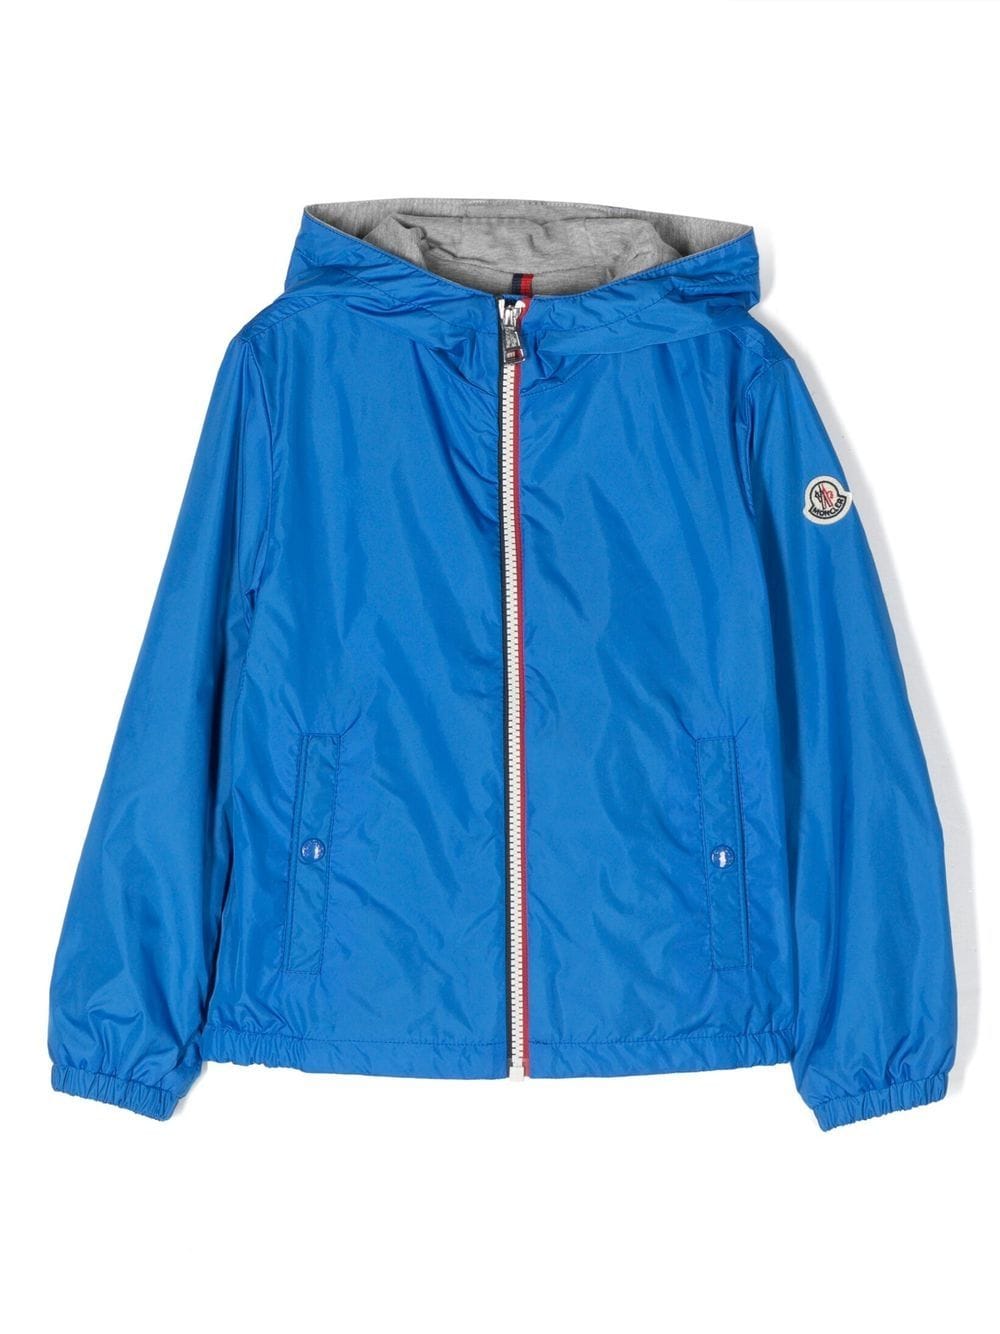 New Urville blue jacket for boys with logo